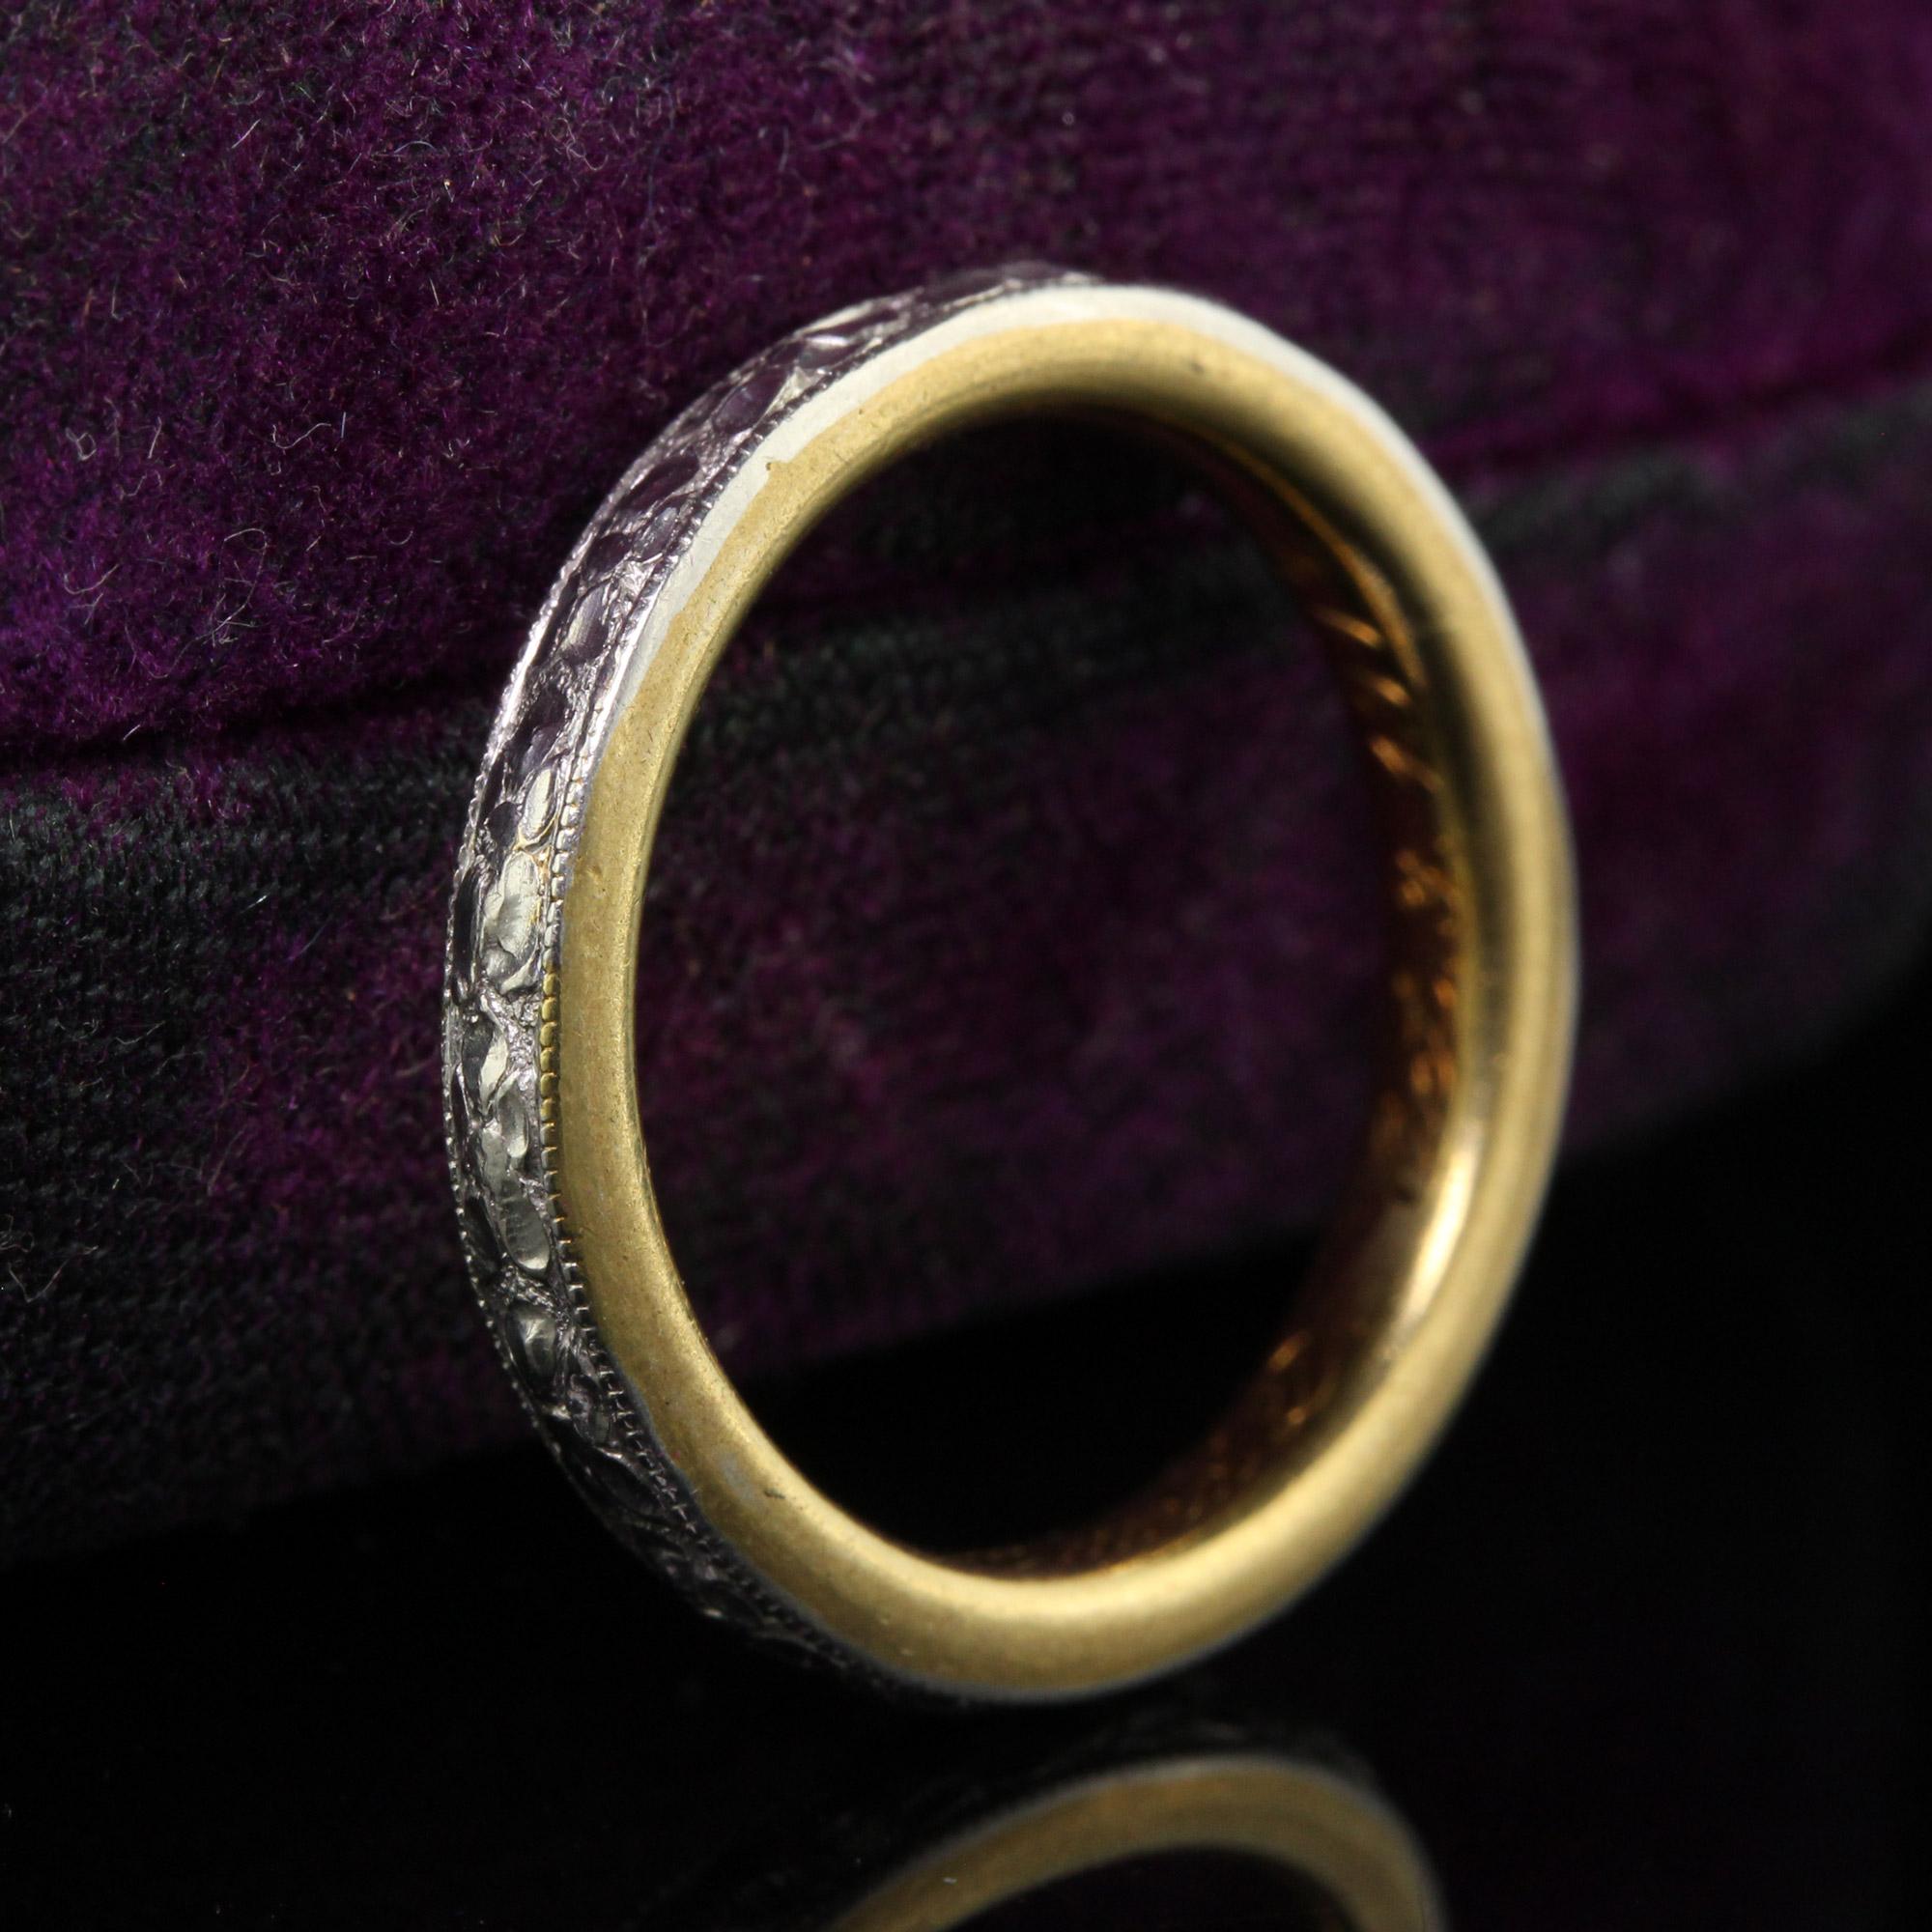 Antique Art Deco Platinum and 18K Gold Engraved Wedding Band Circa 1917 - Size 5 In Excellent Condition For Sale In Great Neck, NY